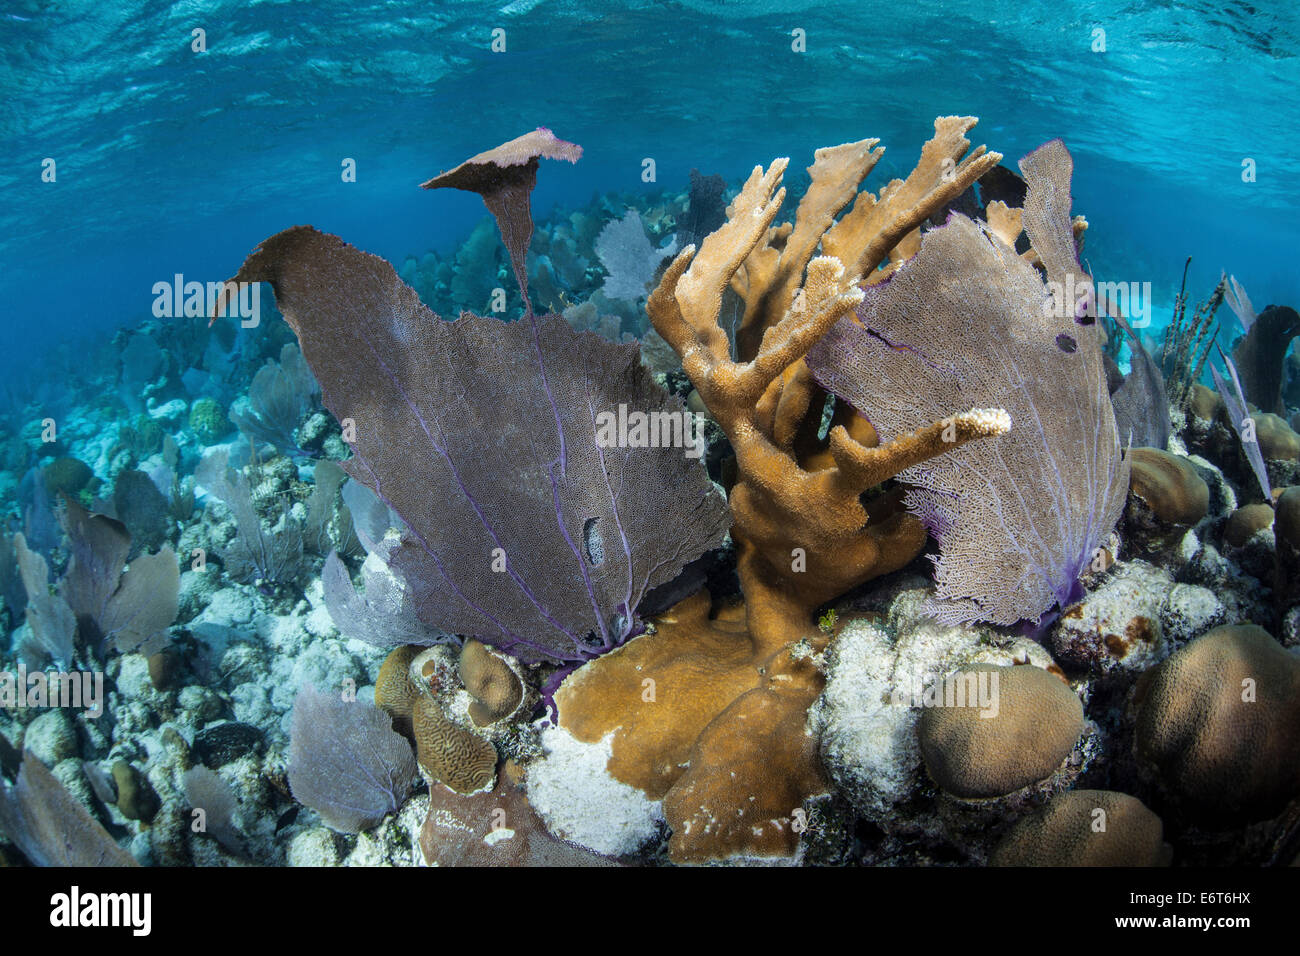 Caribbean Coral Reef, Turneffe Atoll, Caribbean, Belize Stock Photo